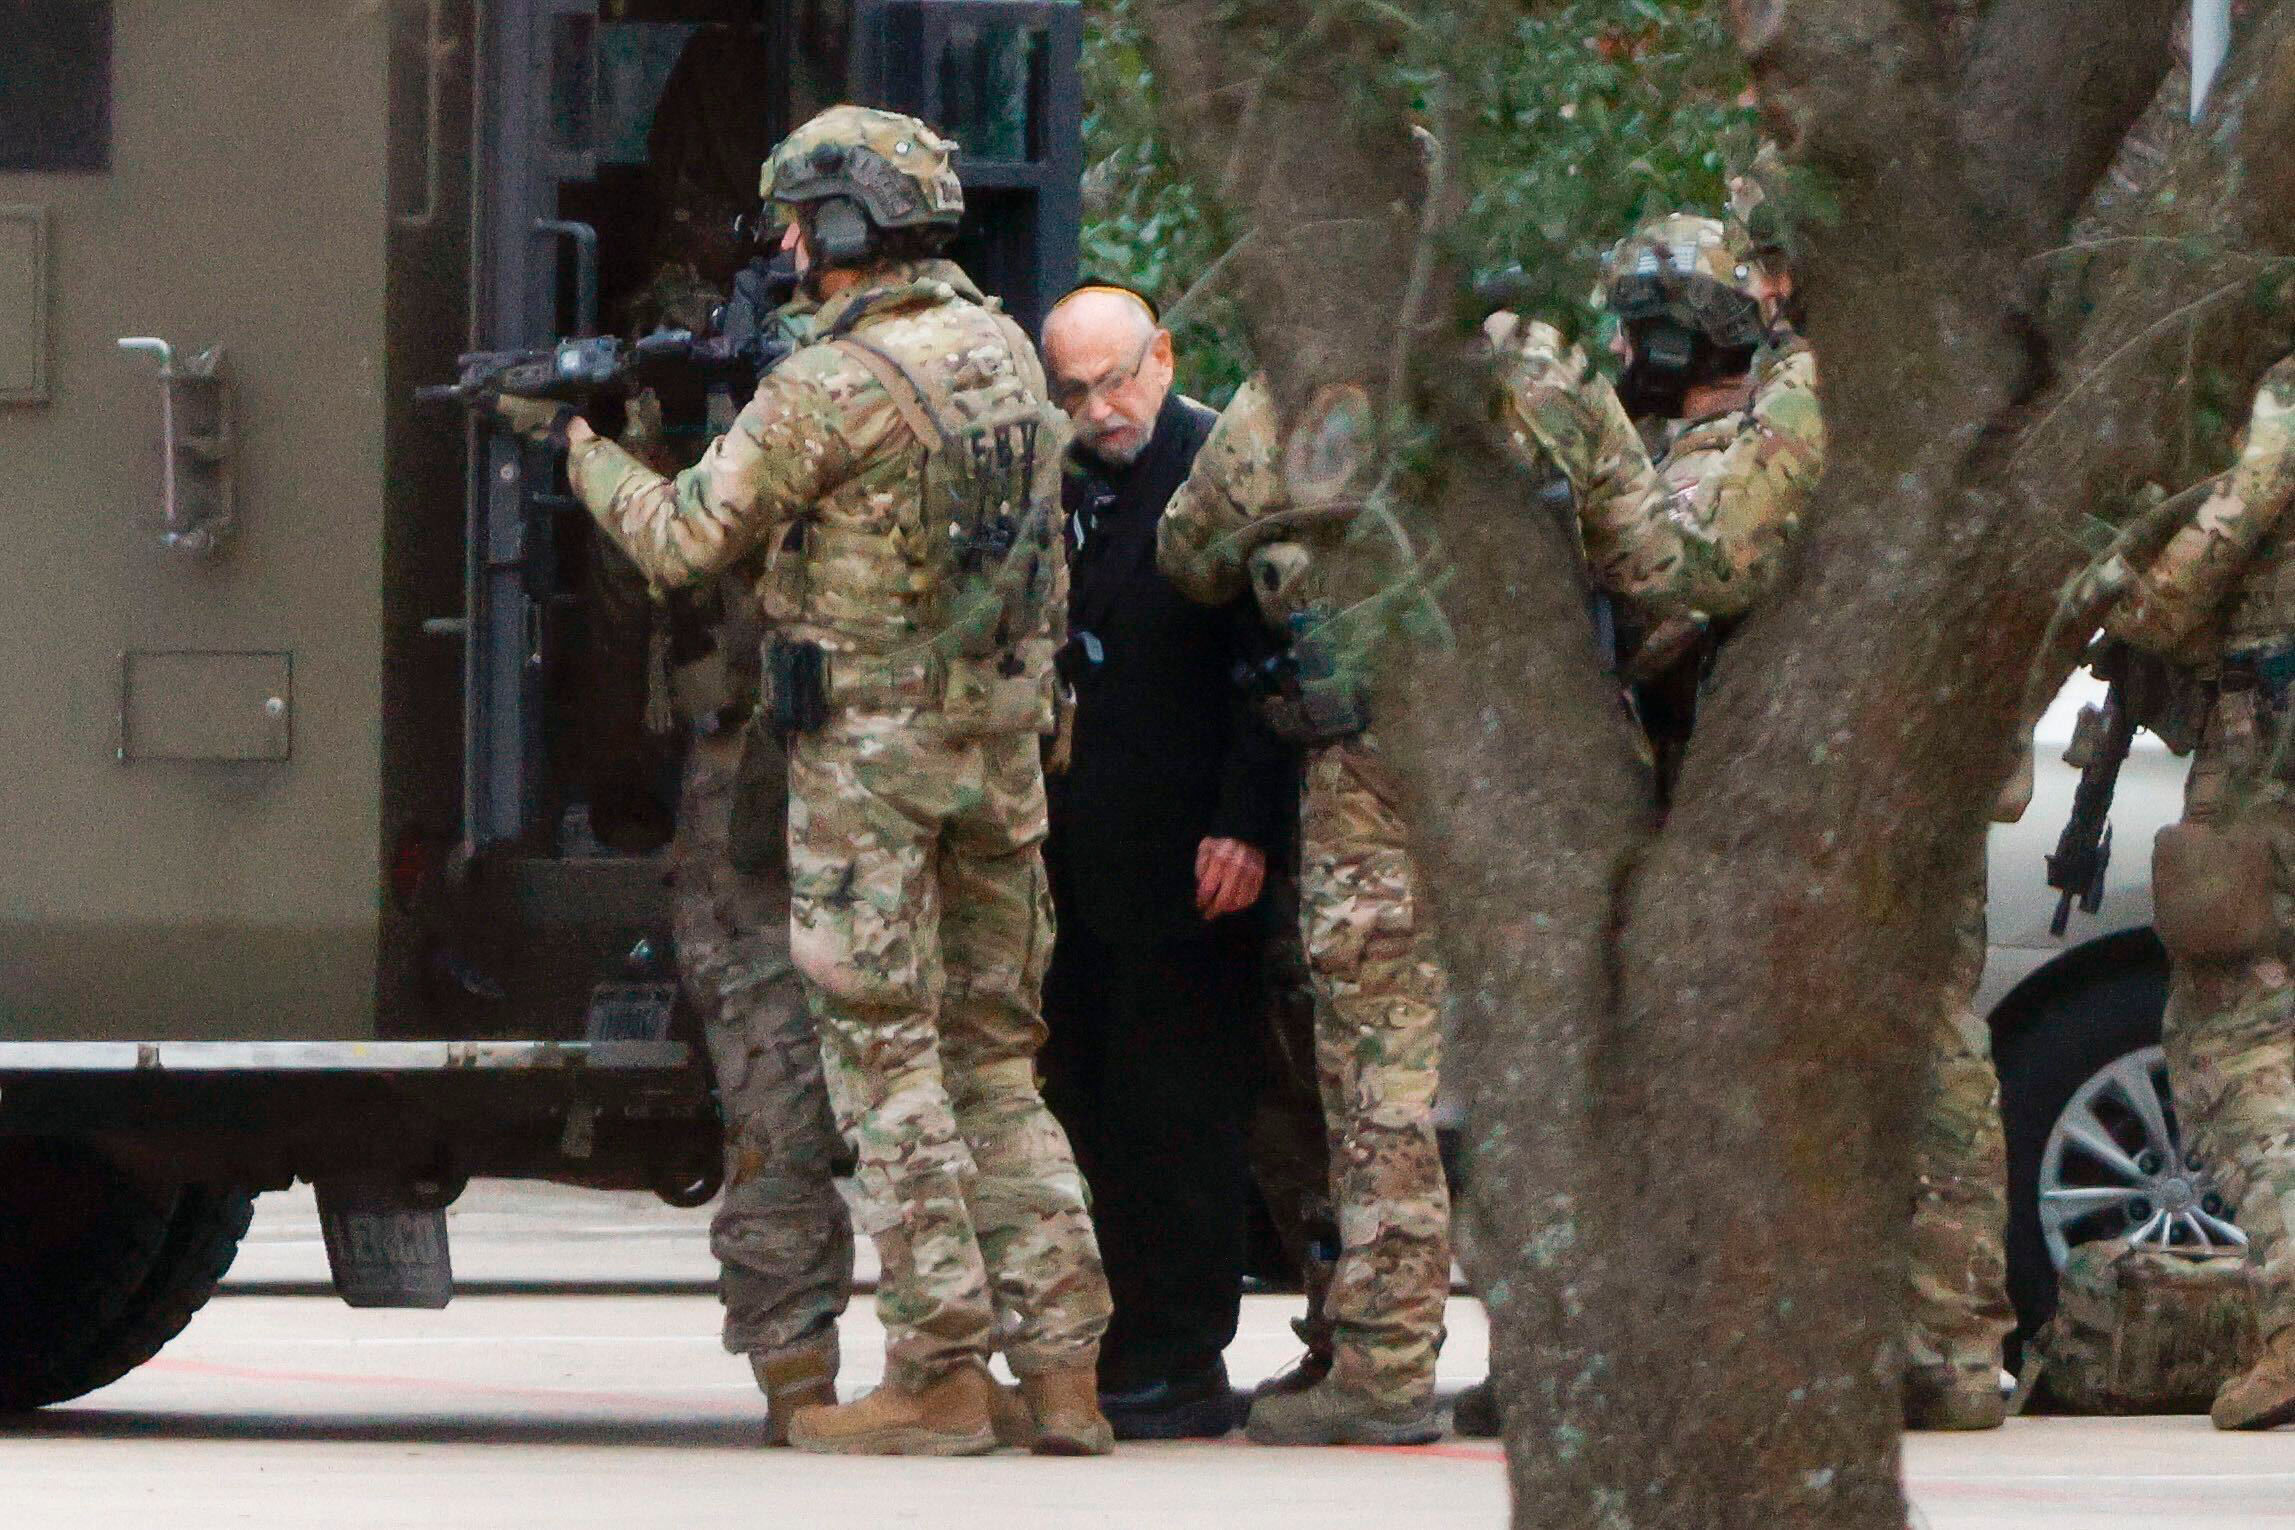 Texas rabbi says he, two other hostages escaped synagogue standoff